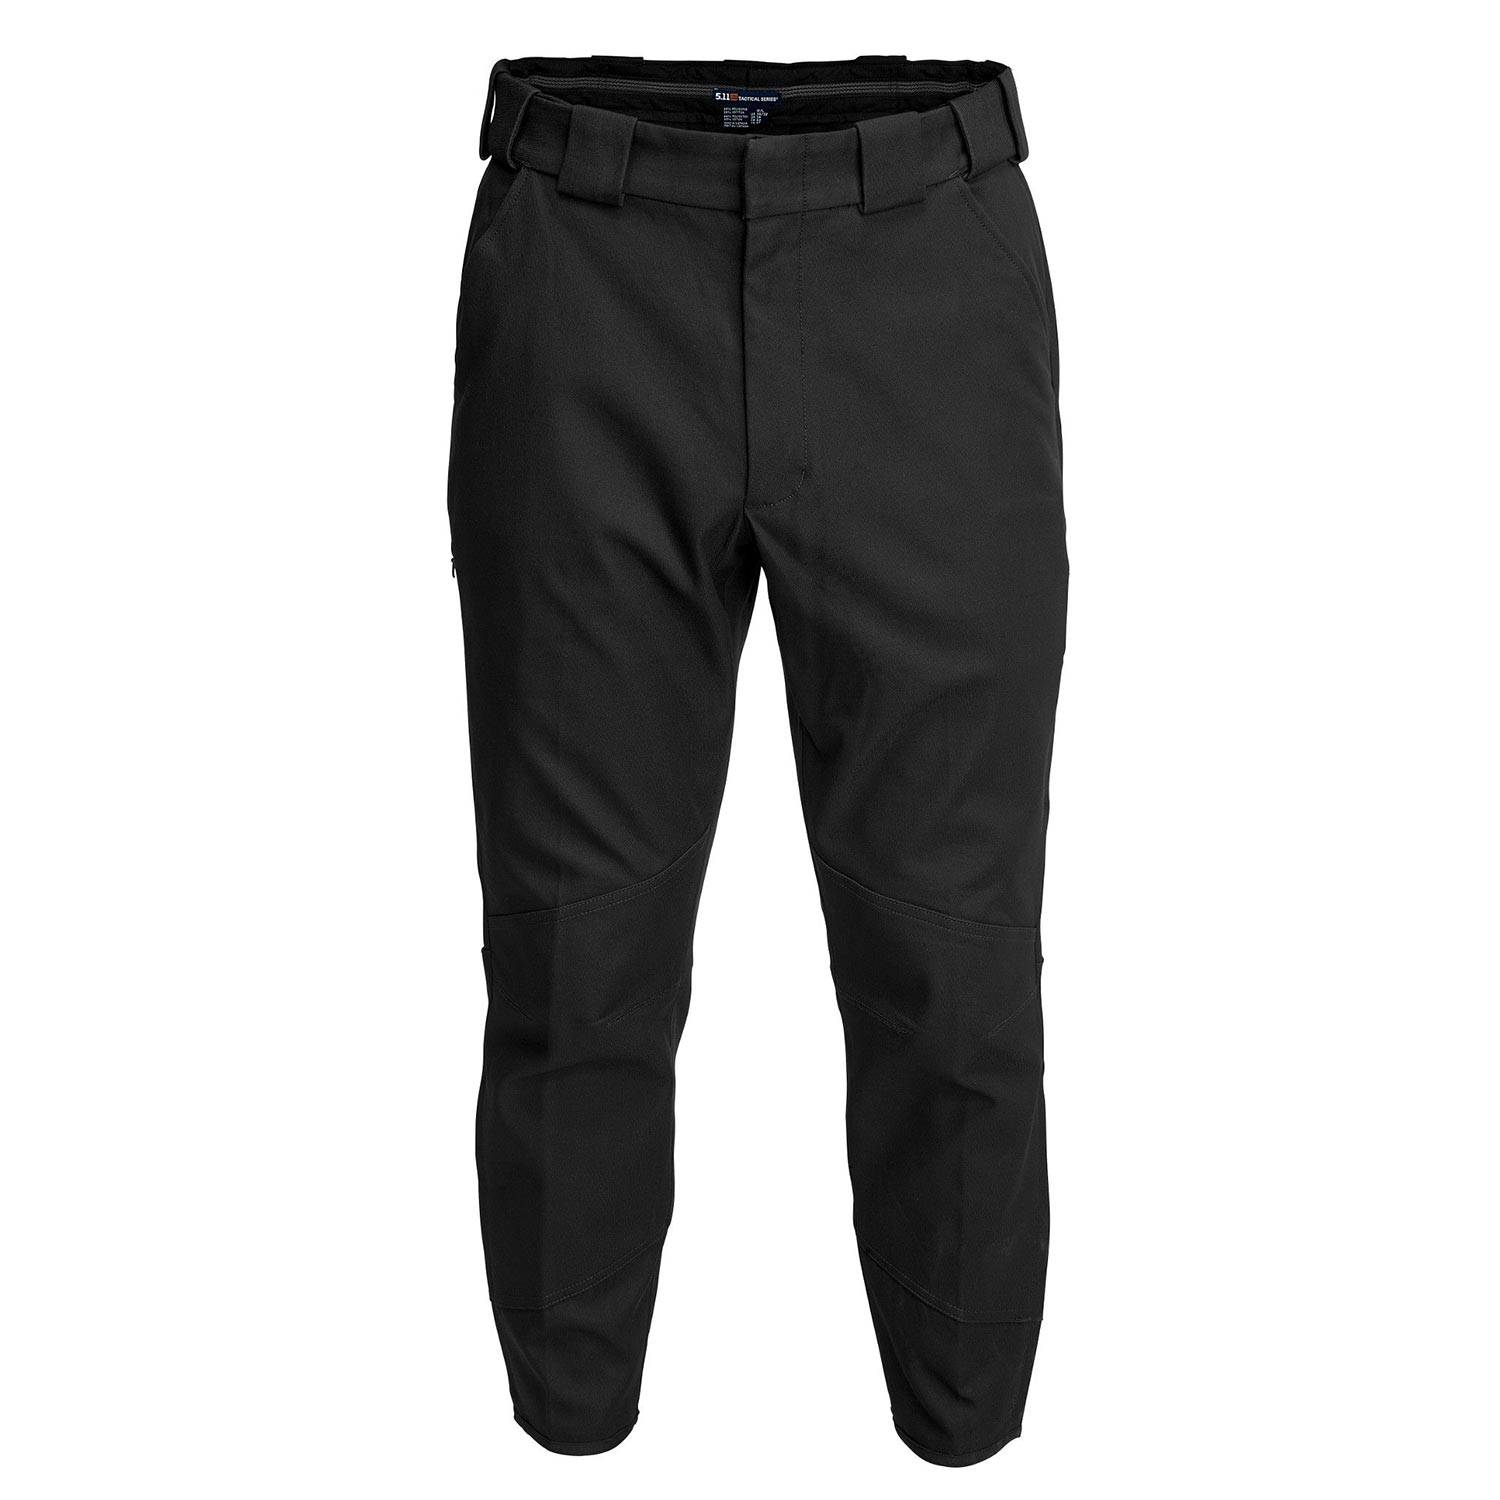 5.11 TACTICAL MOTORCYCLE BREECHES